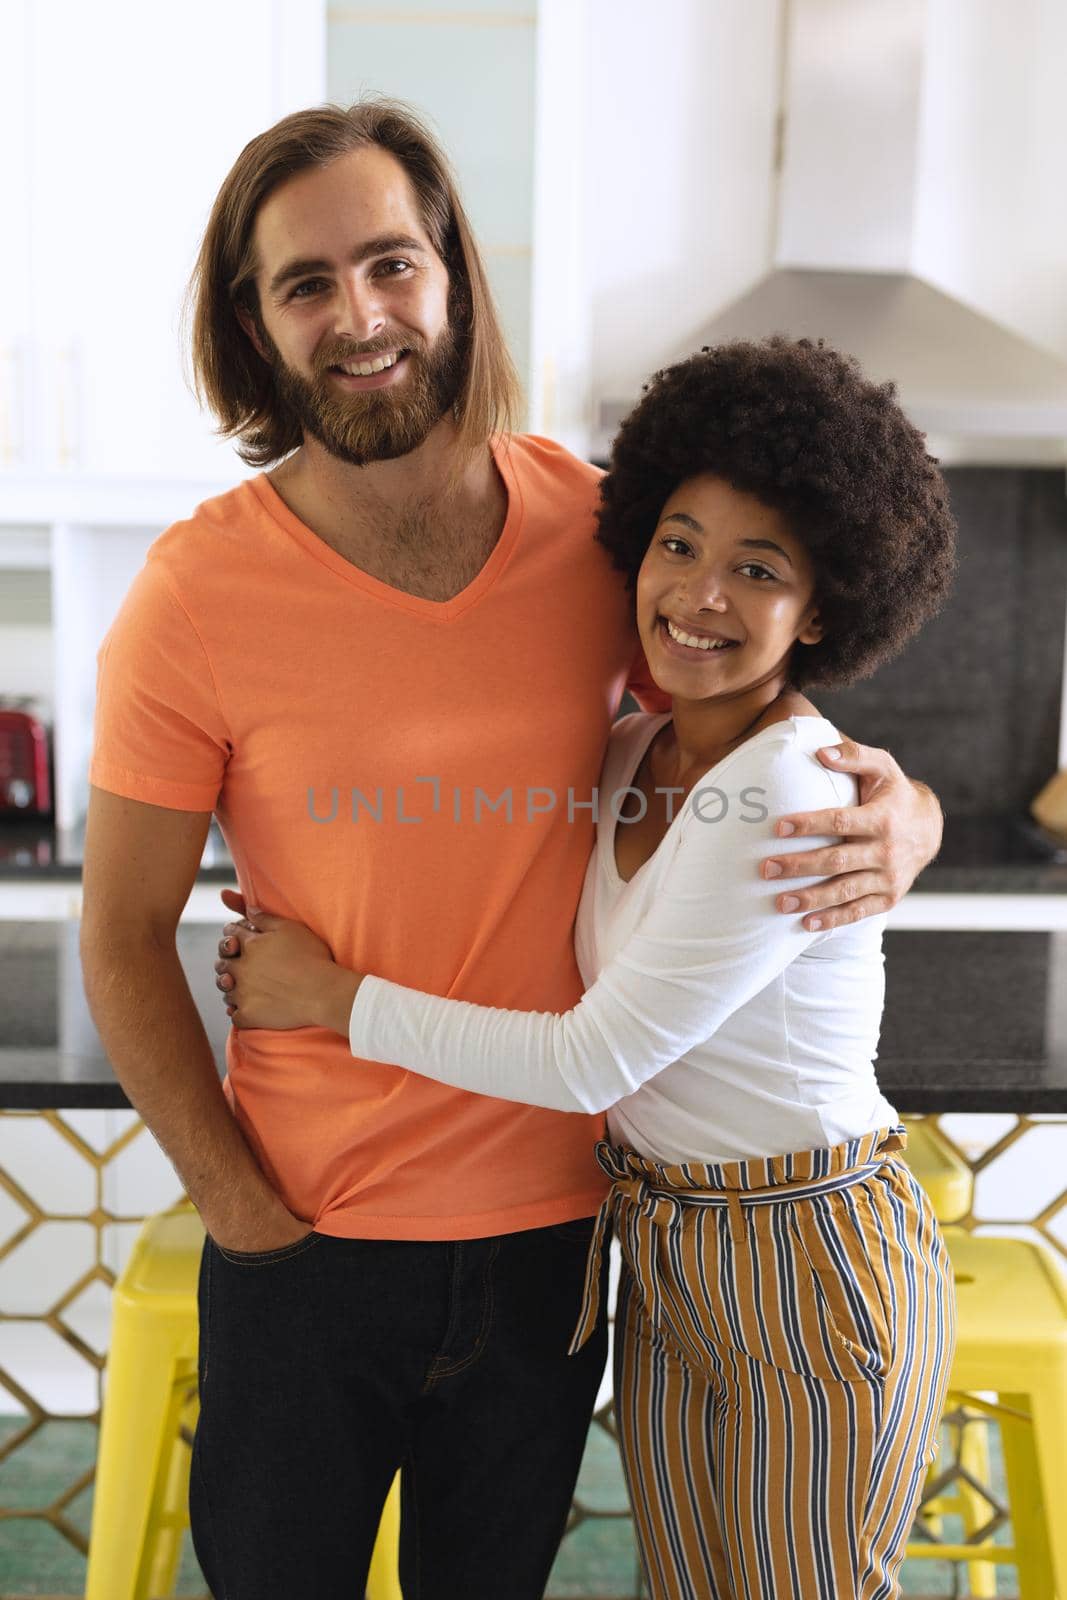 Portrait of happy diverse couple in kitchen smiling and embracing. staying at home in isolation during quarantine lockdown.